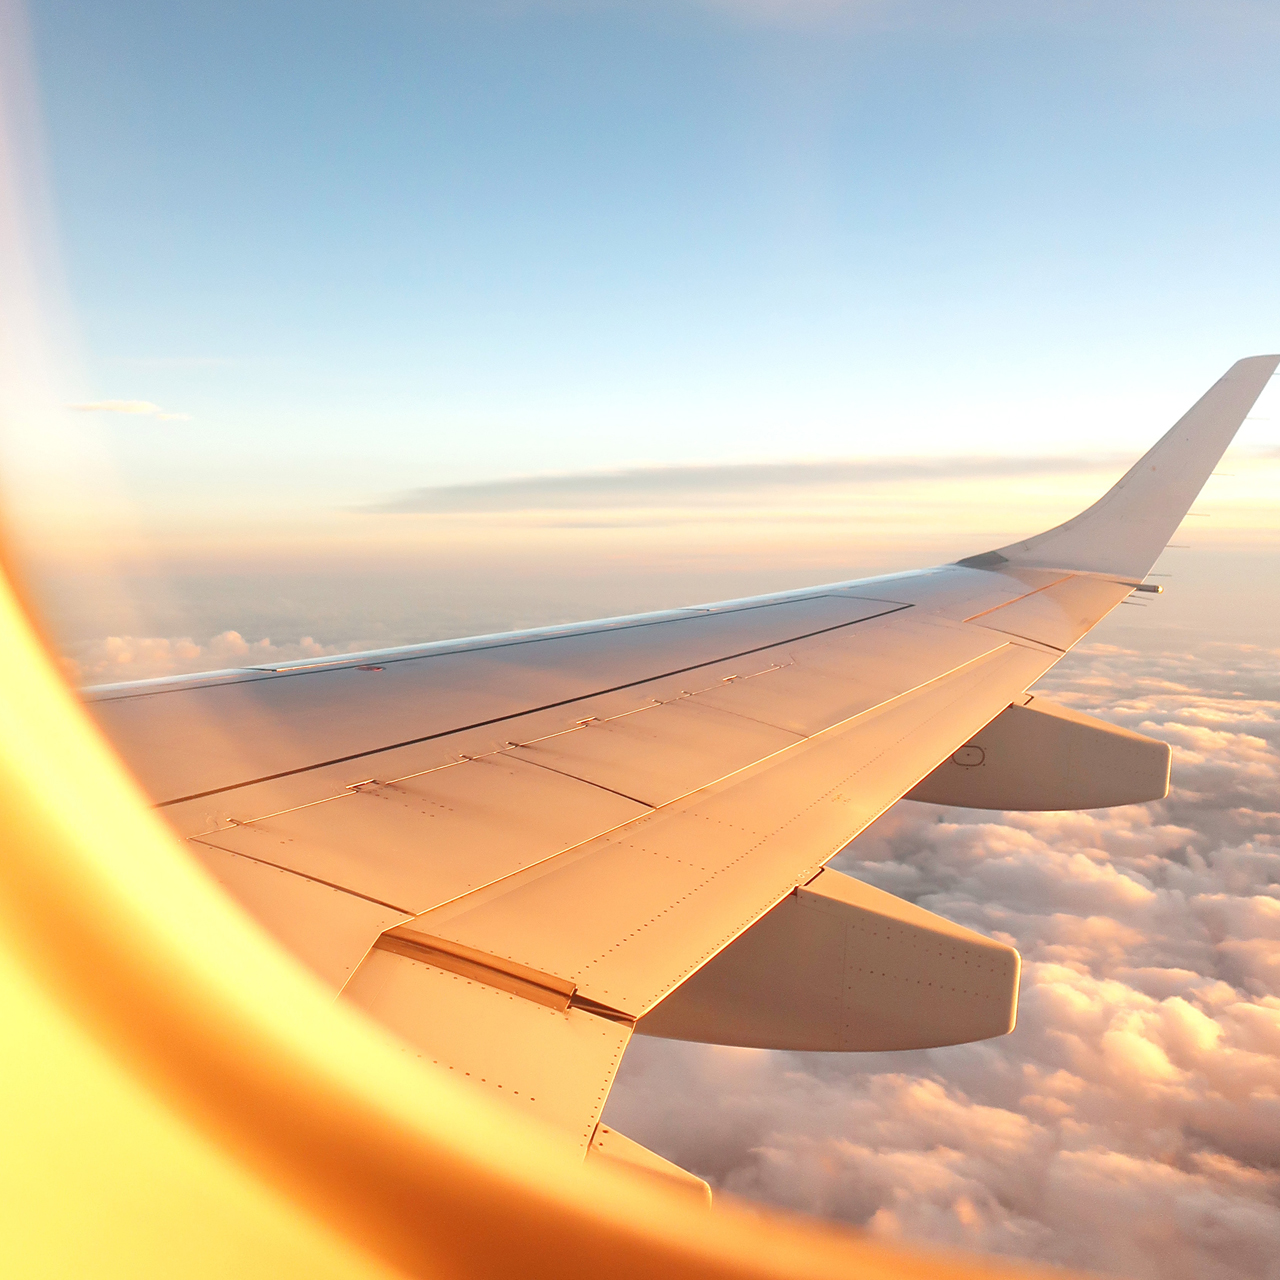 Image of an airplane wing looking out the window of the plane